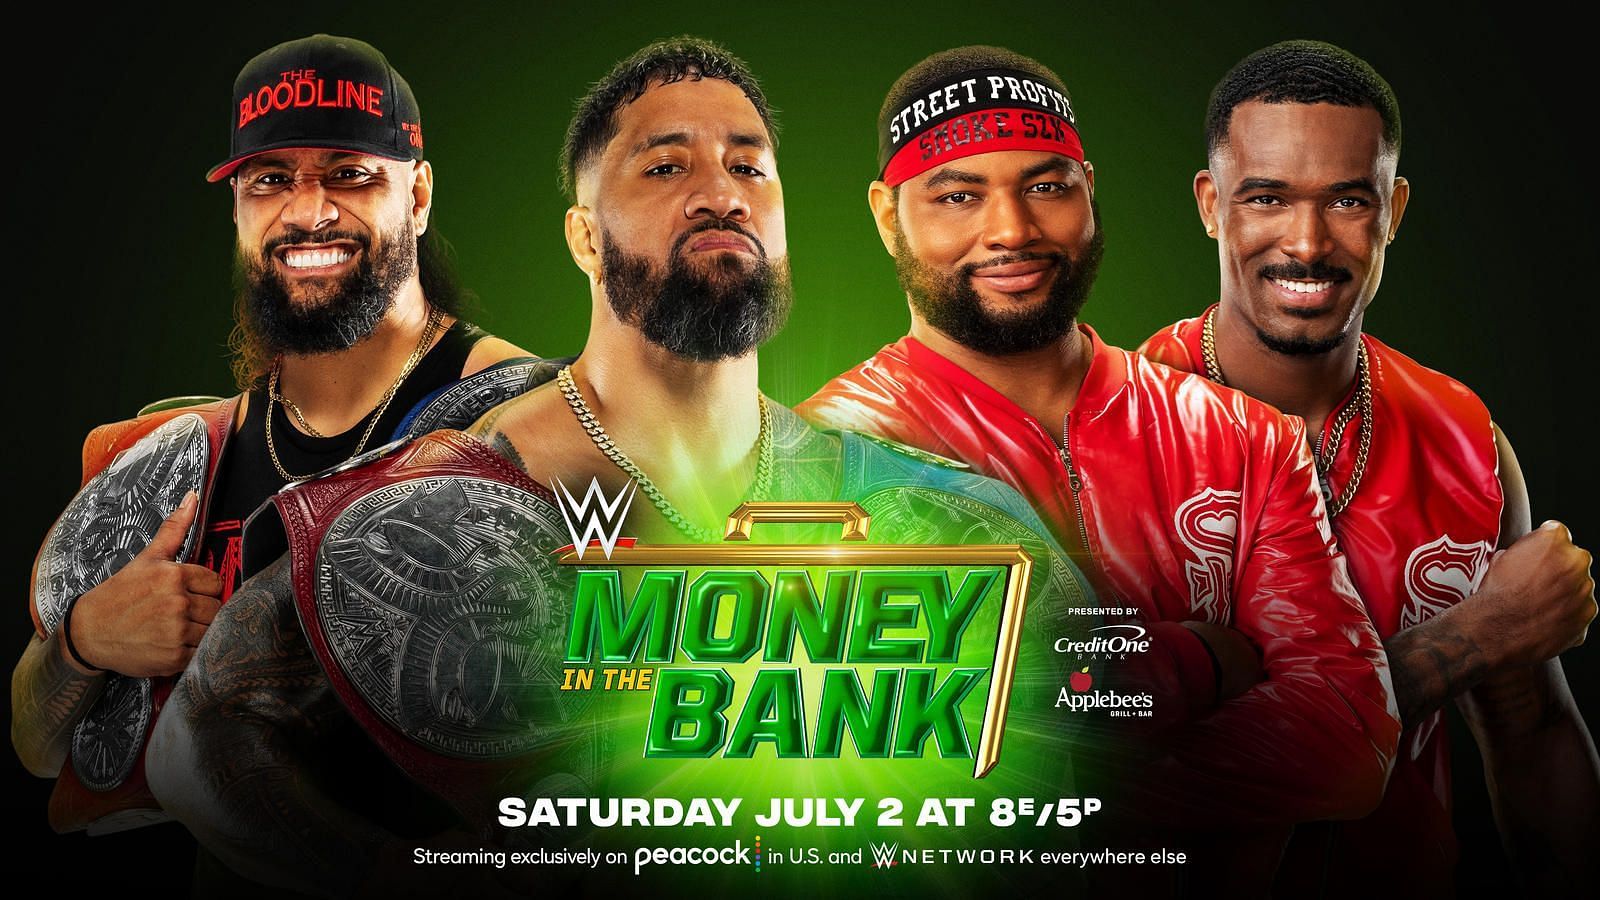 WWE Undisputed Tag Team Championship match at Money In The Bank announced